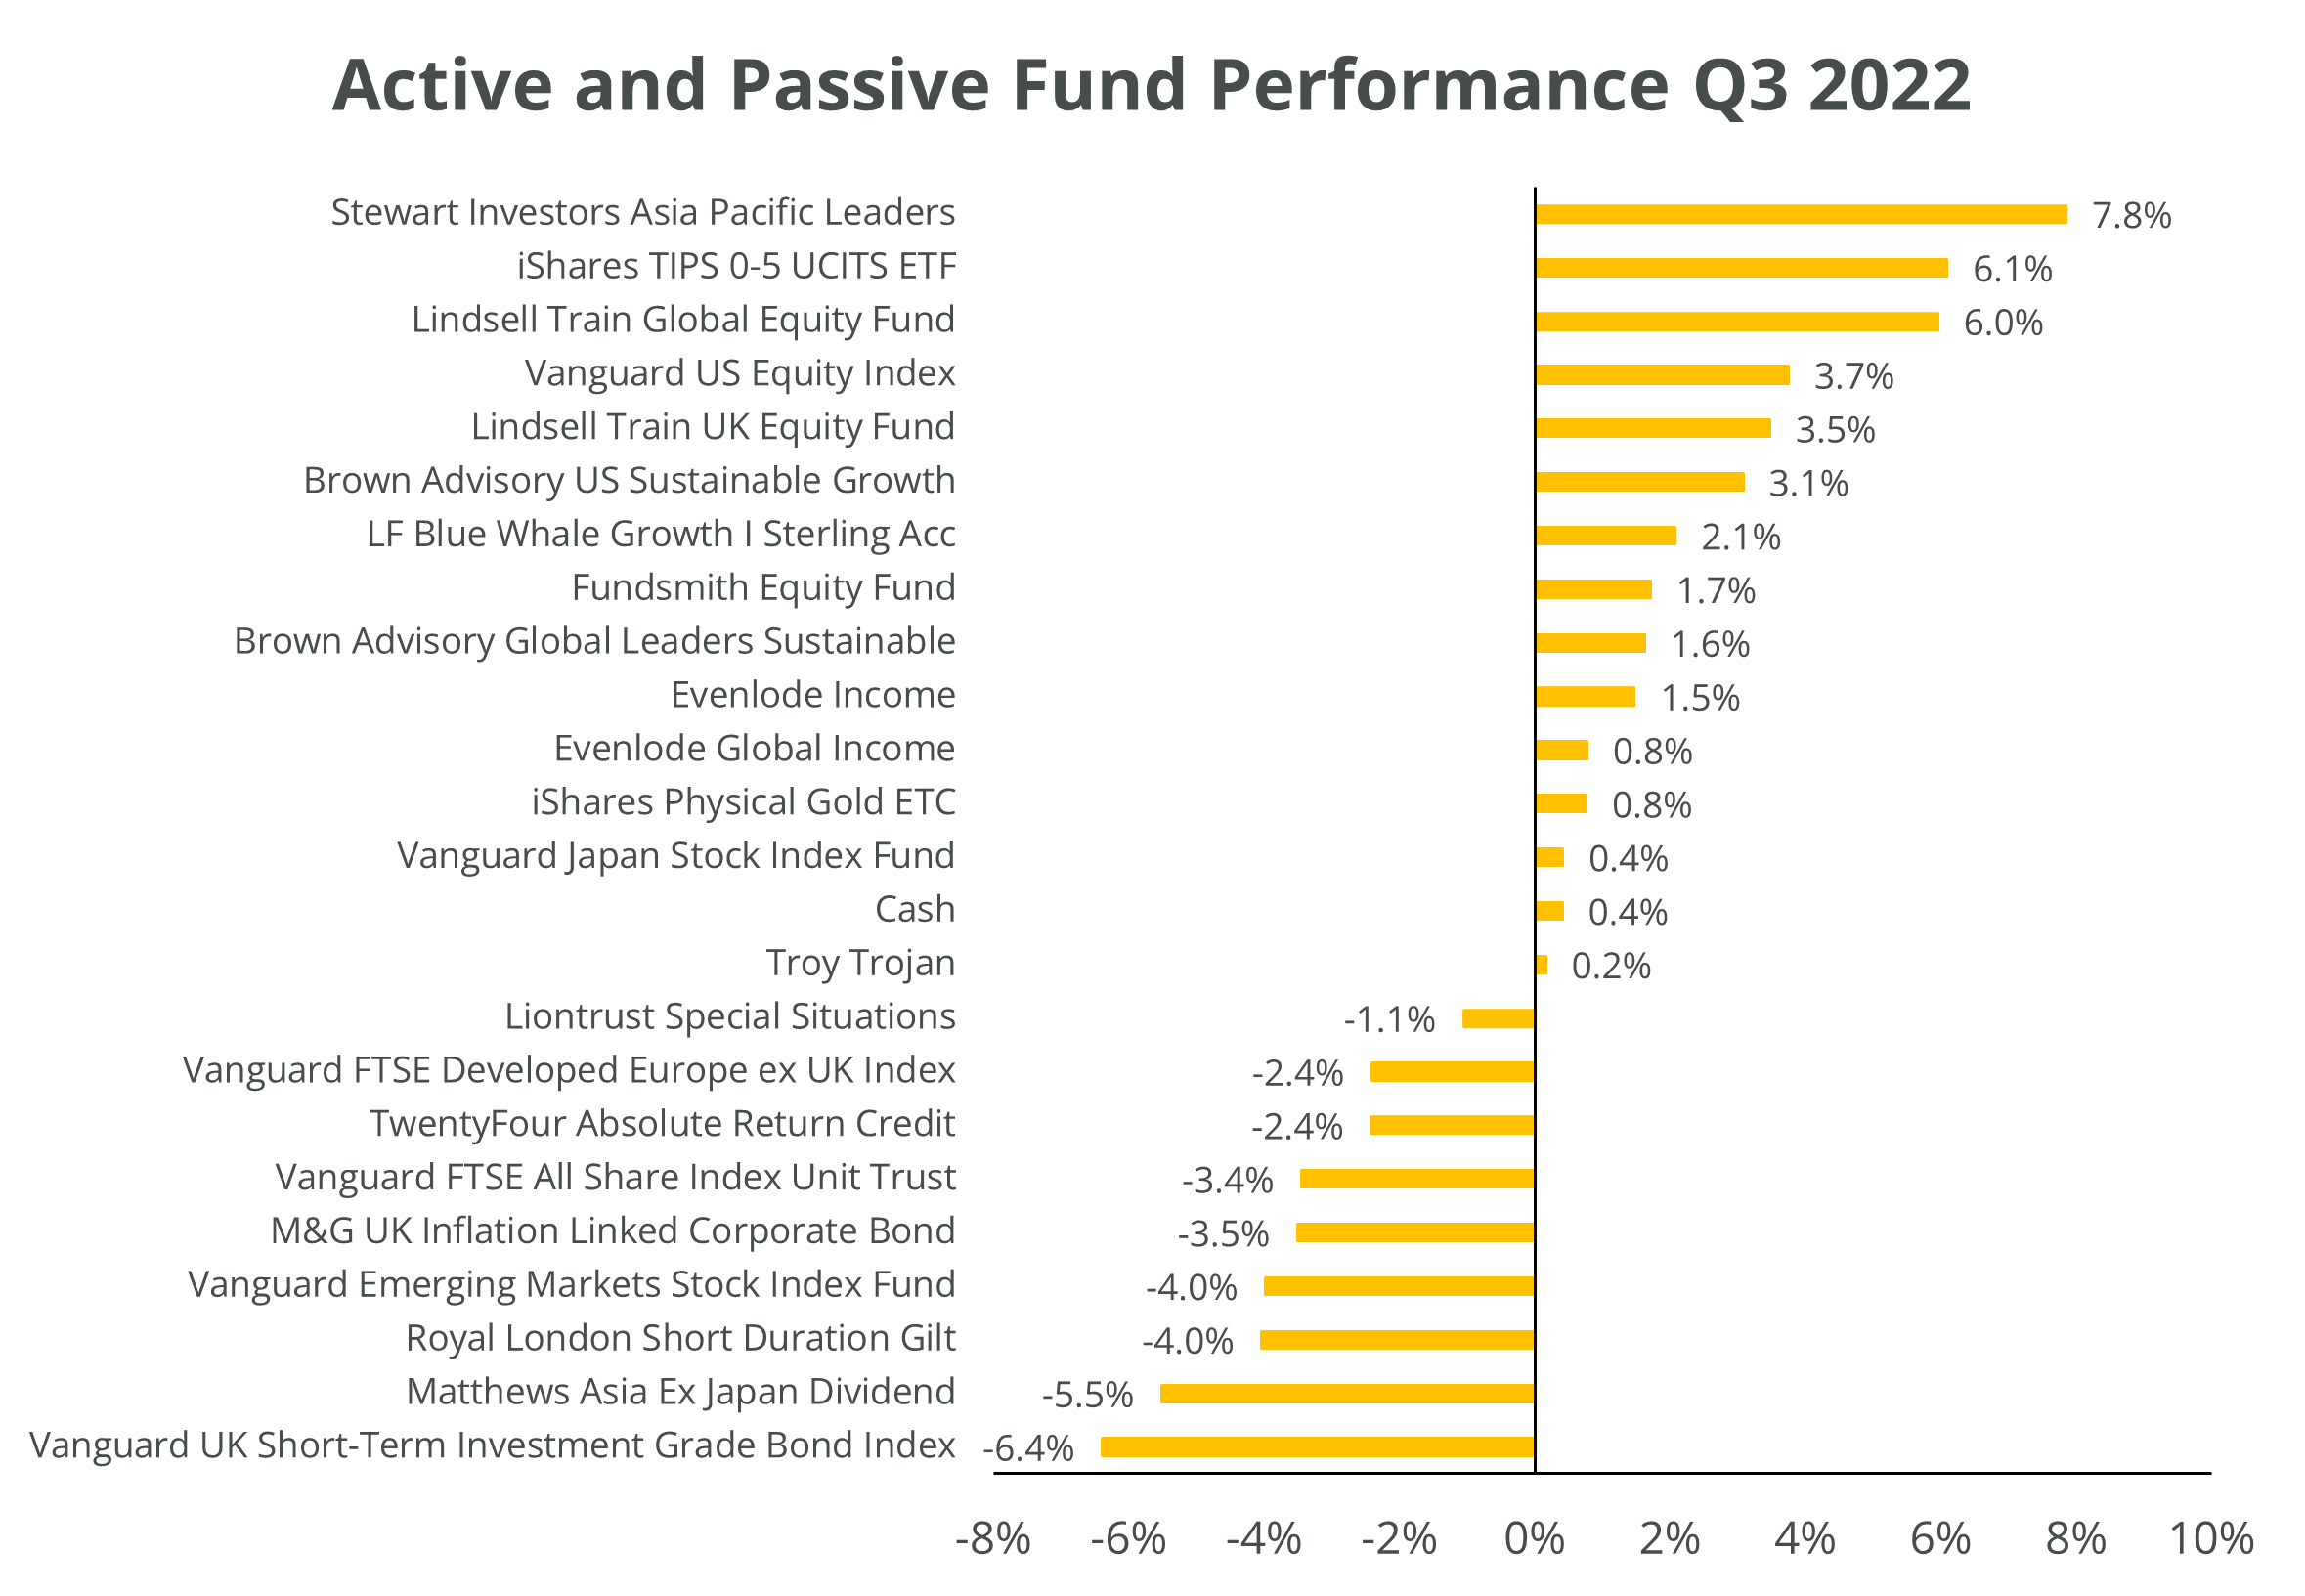 Chart of fund performance year to date as of September 2022